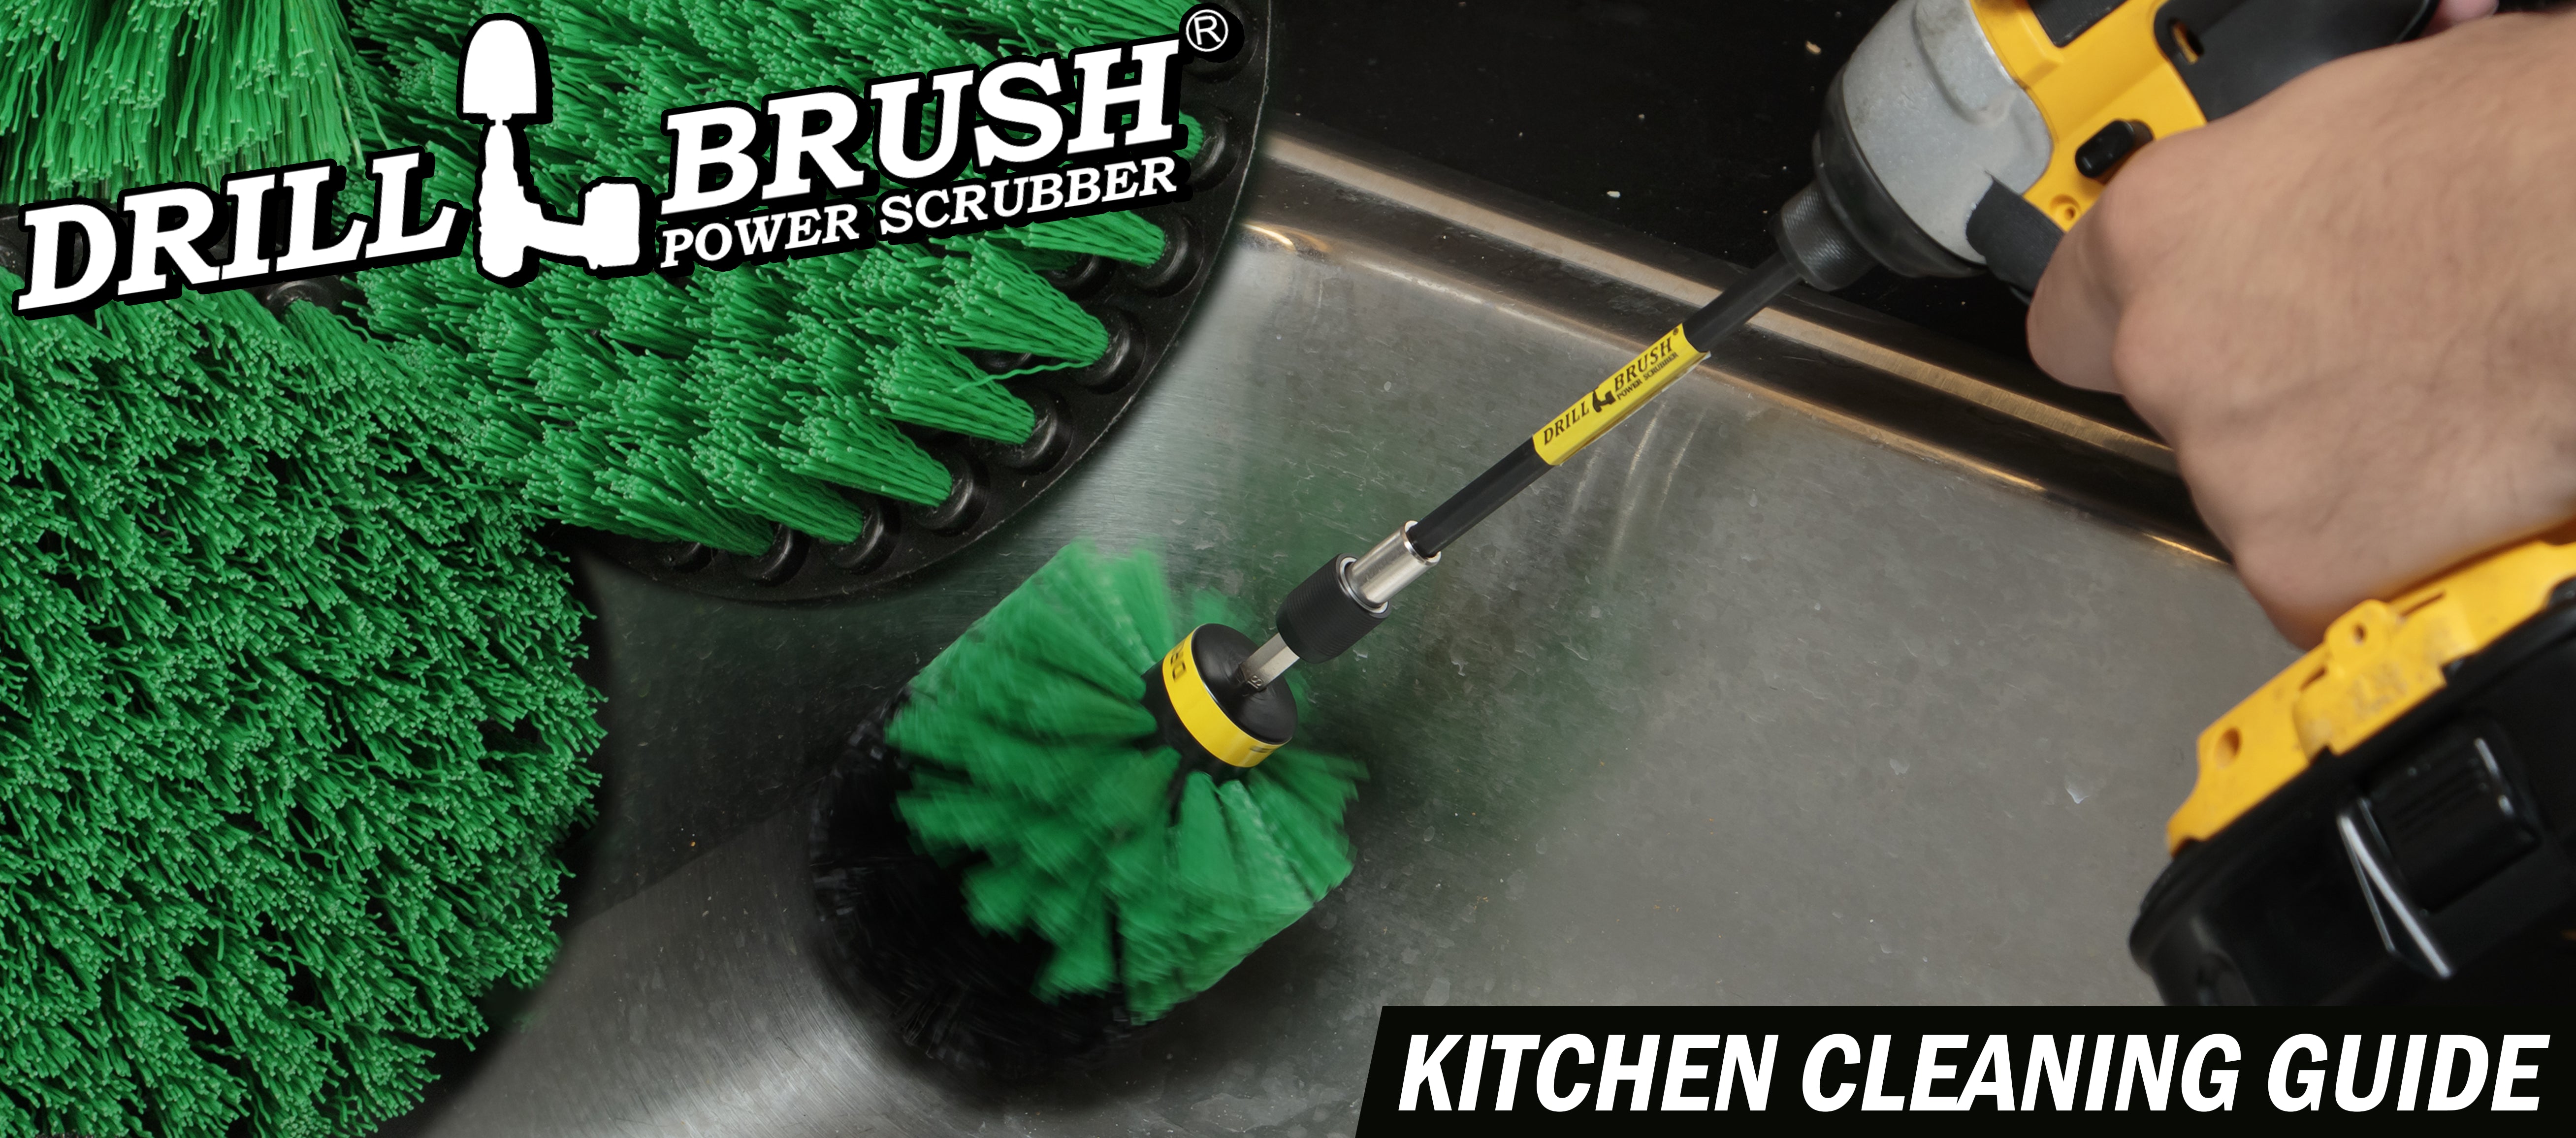 The Behind The Faucet Brush! Clean Hard to Reach Areas in Your Kitchen and  Bathroom - Easily Clean Water and soap Residue Around The Sink. Two Pack